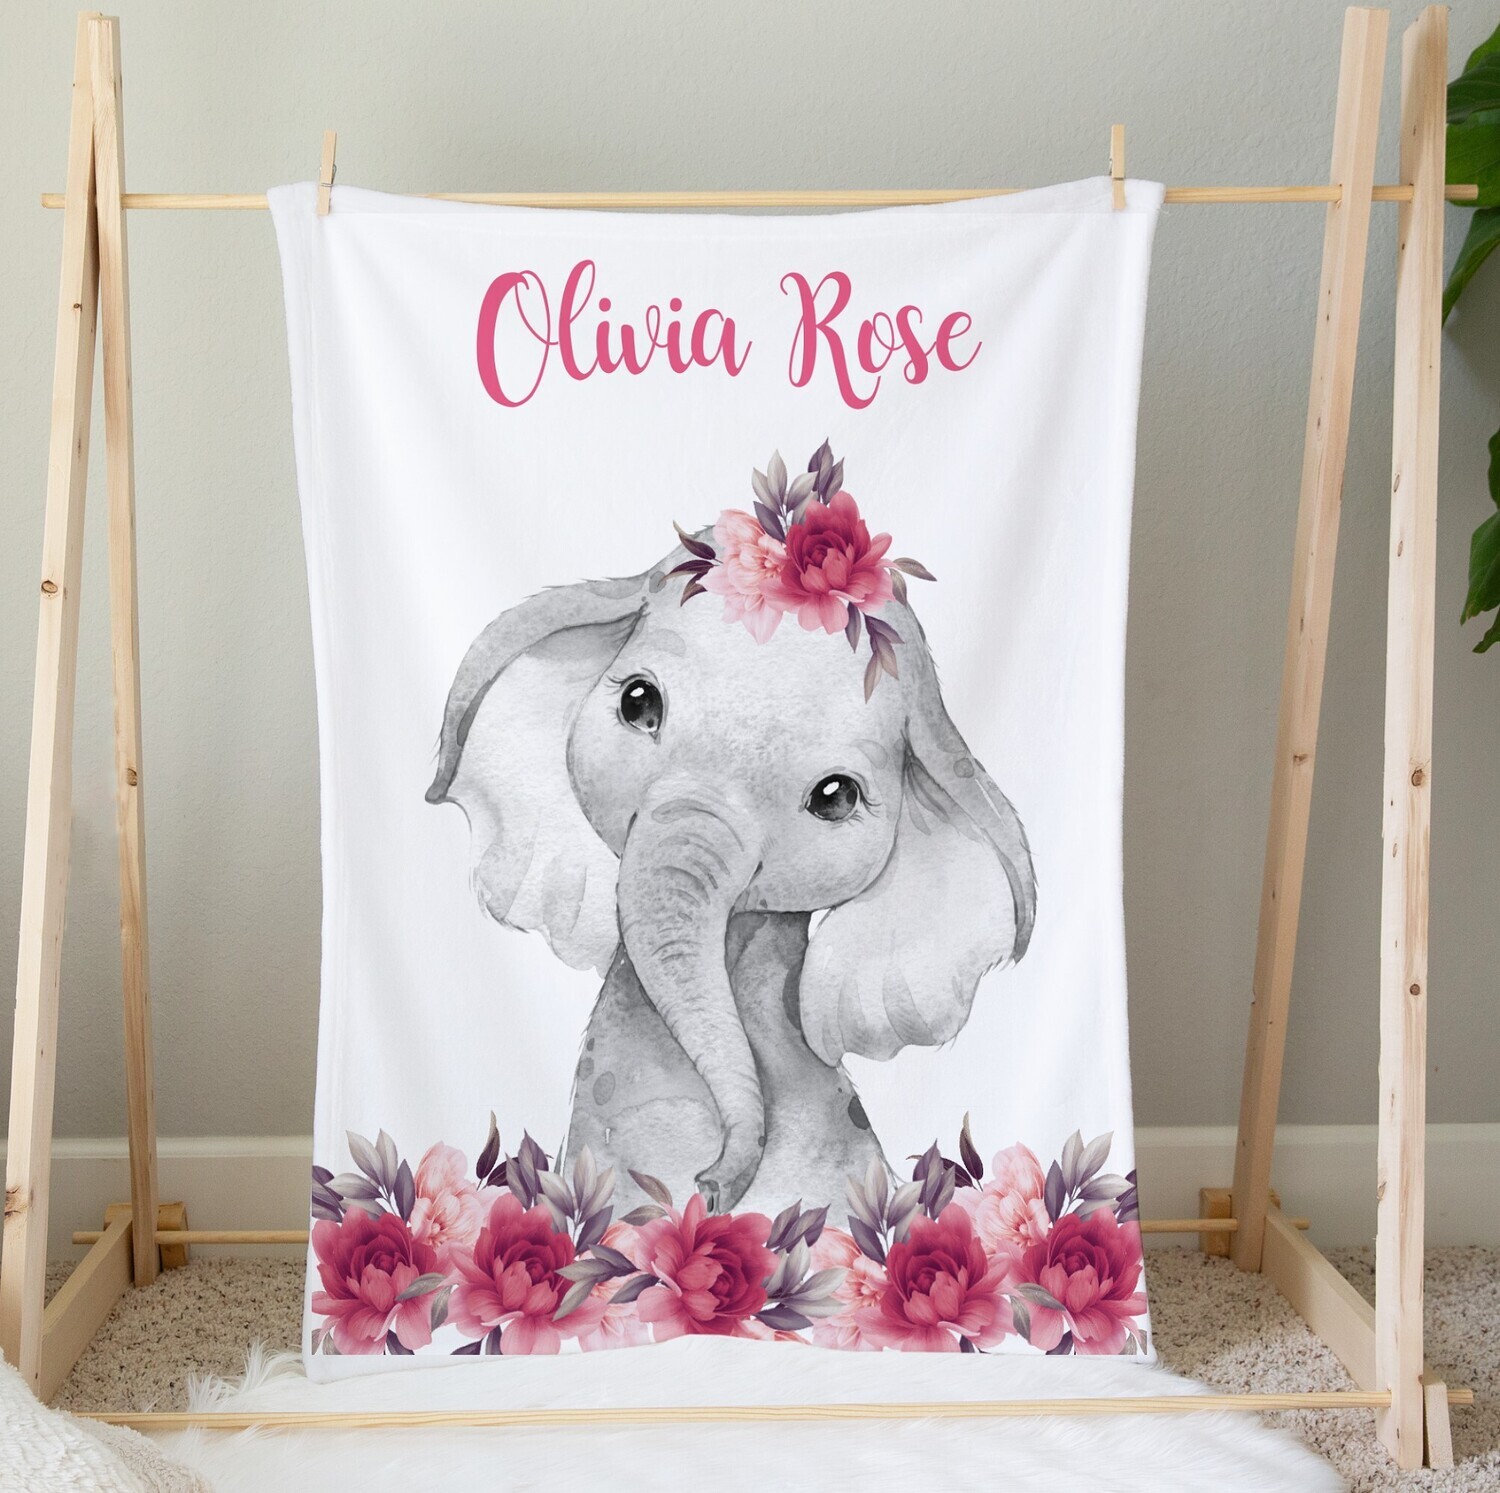 Baby Girl Blanket Pink Floral Elephant Personalized Blanket Newborn Baby Shower Gift Minky Blanket Fleece Blanket Sherpa Baby Blanket